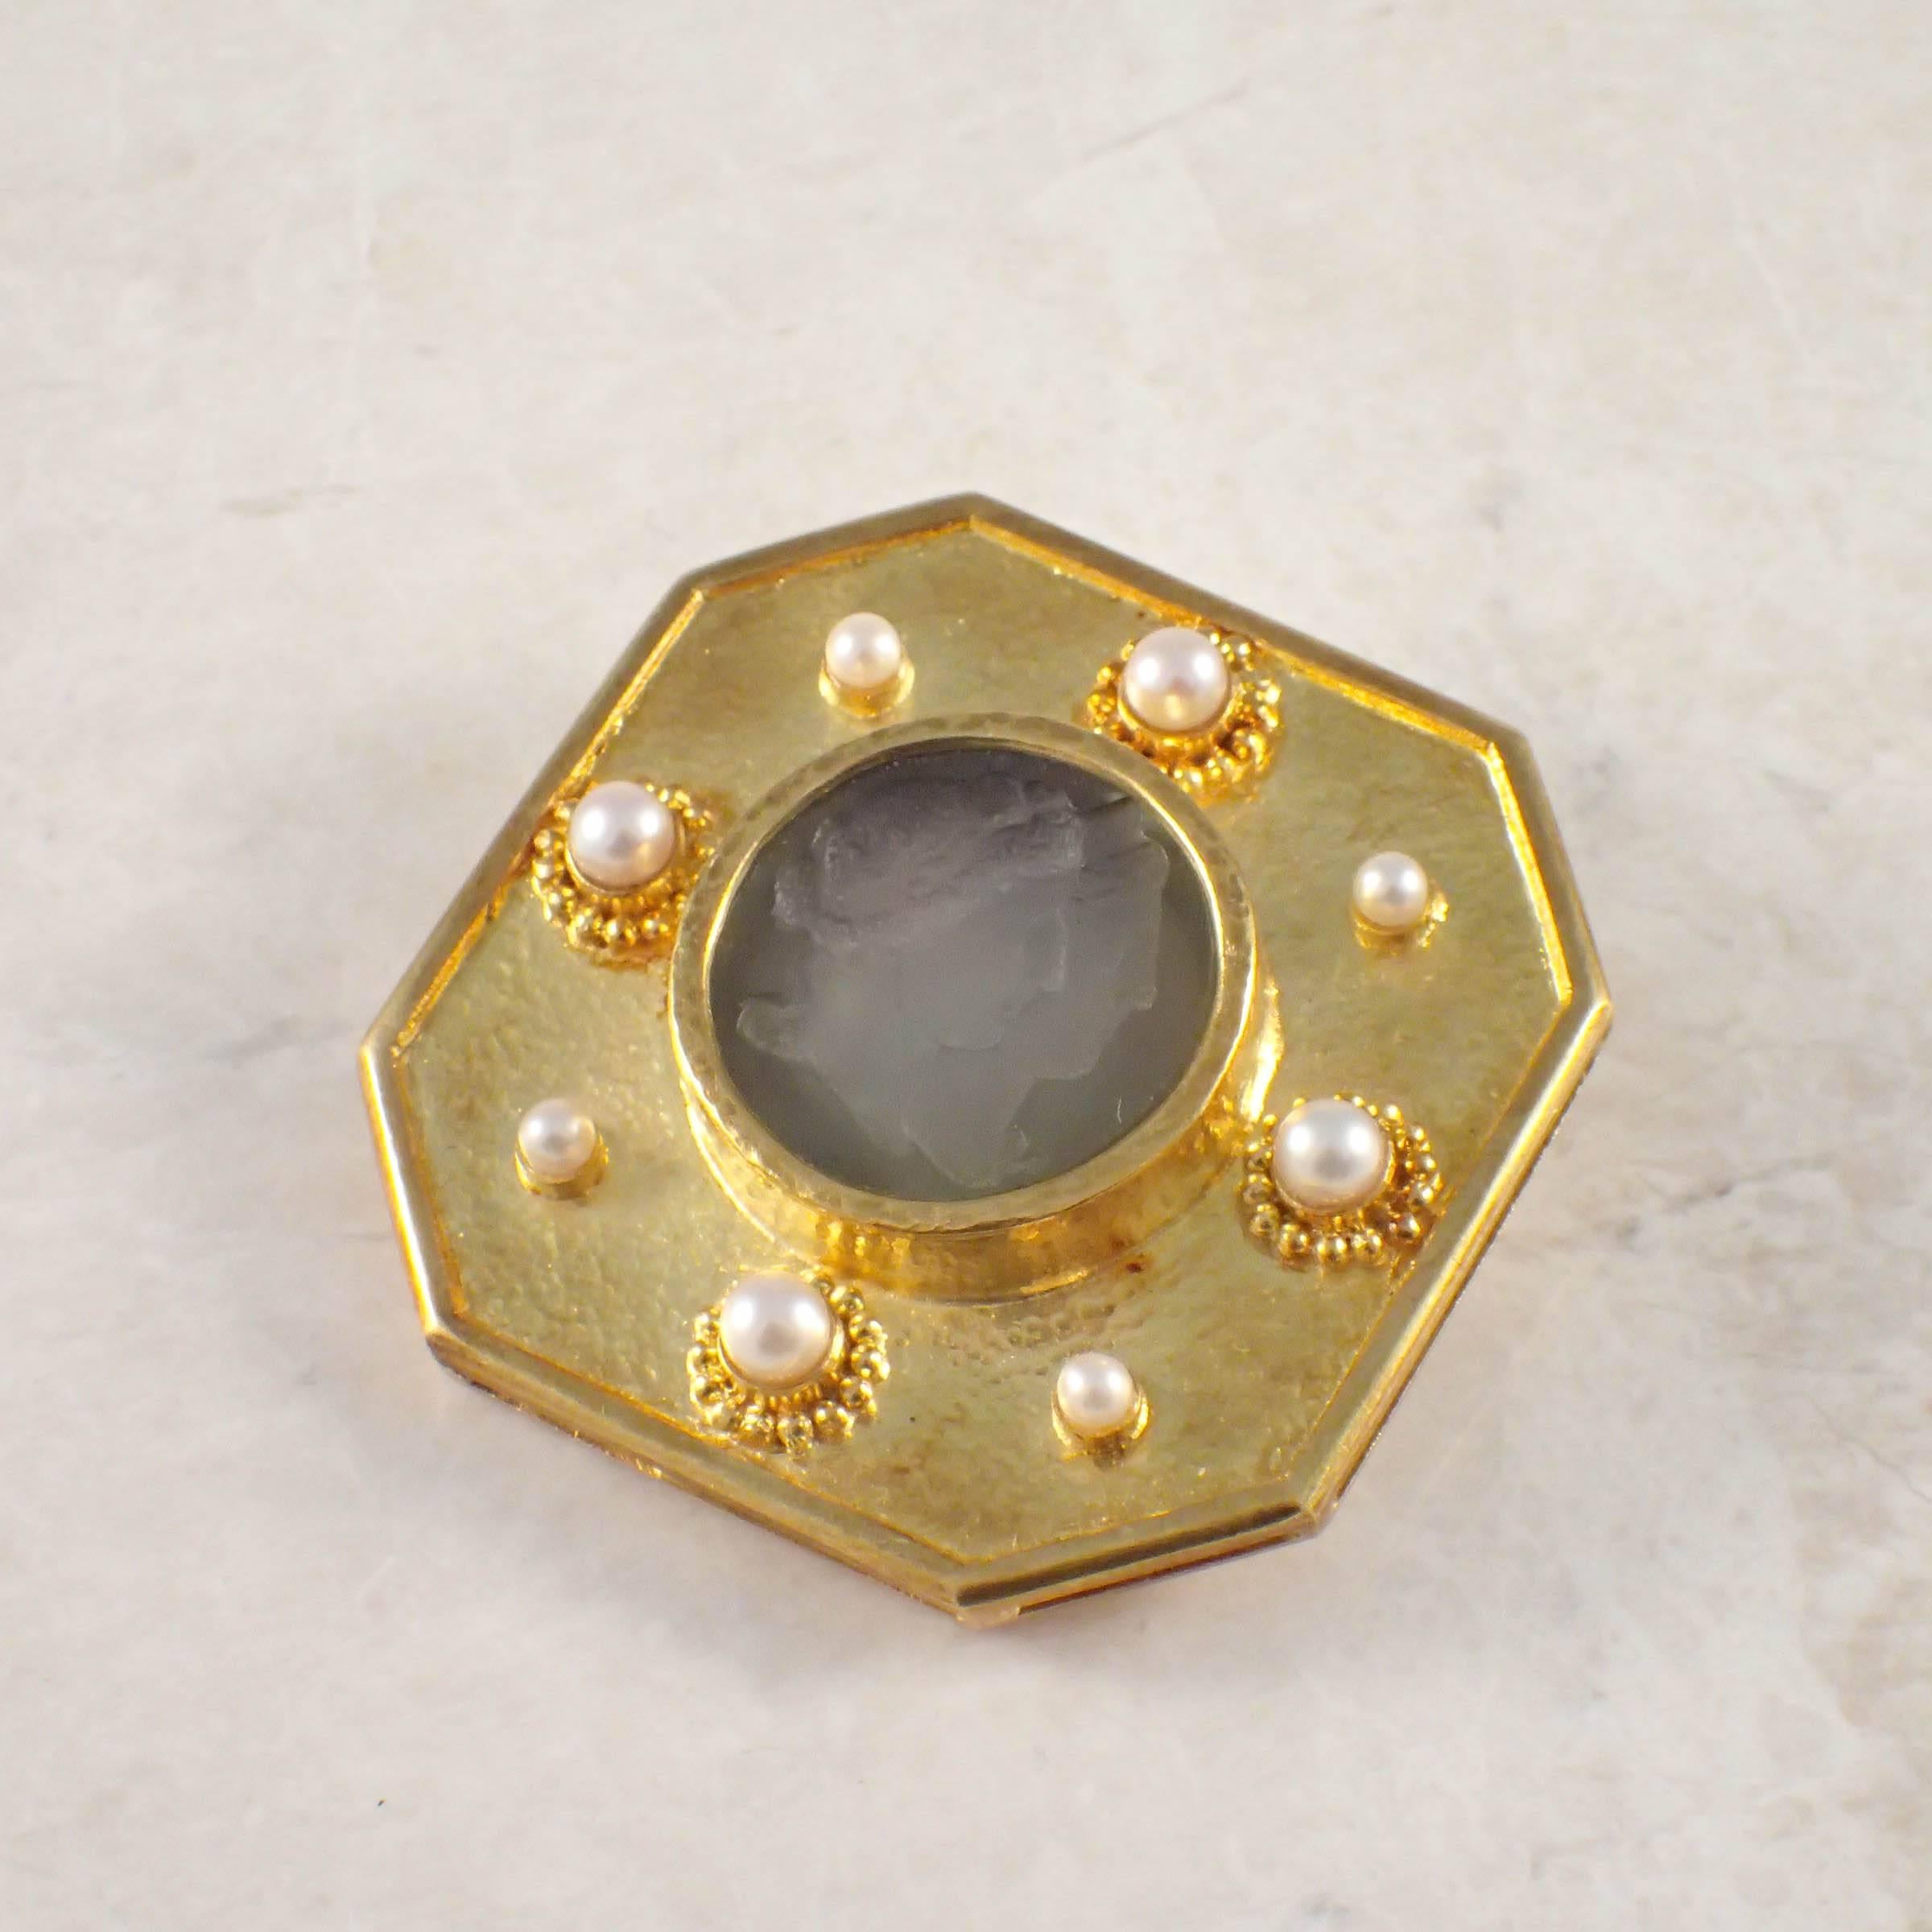 18k yellow gold Elizabeth Locke pearl cameo brooch.  The square brooch, with cut corners measuring 1 3/4x1 3/4 inches, set with one round green glass cameo measuring 22mm, and eight cultured pearls.  Gold weight 31.1 grams
Elizabeth Locke stamp